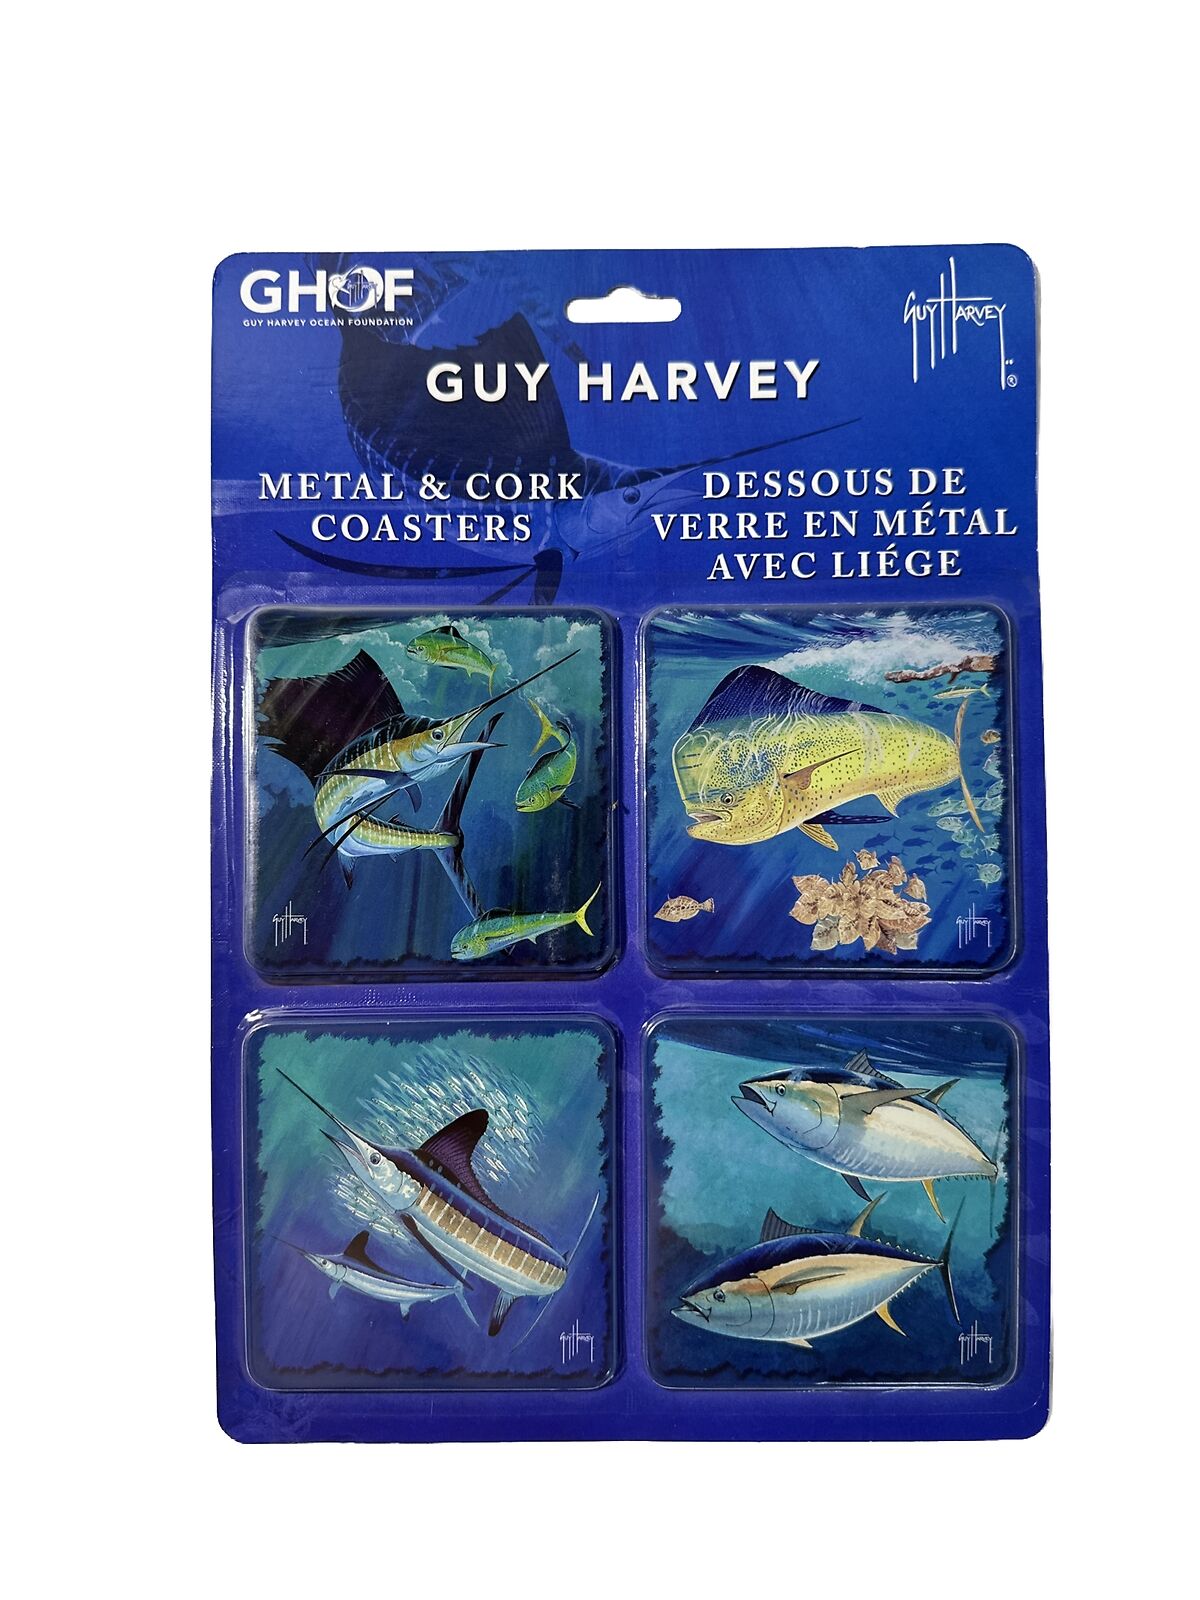 Guy Harvey Coasters Metal and Cork Set of 4 Brand New in Box. 